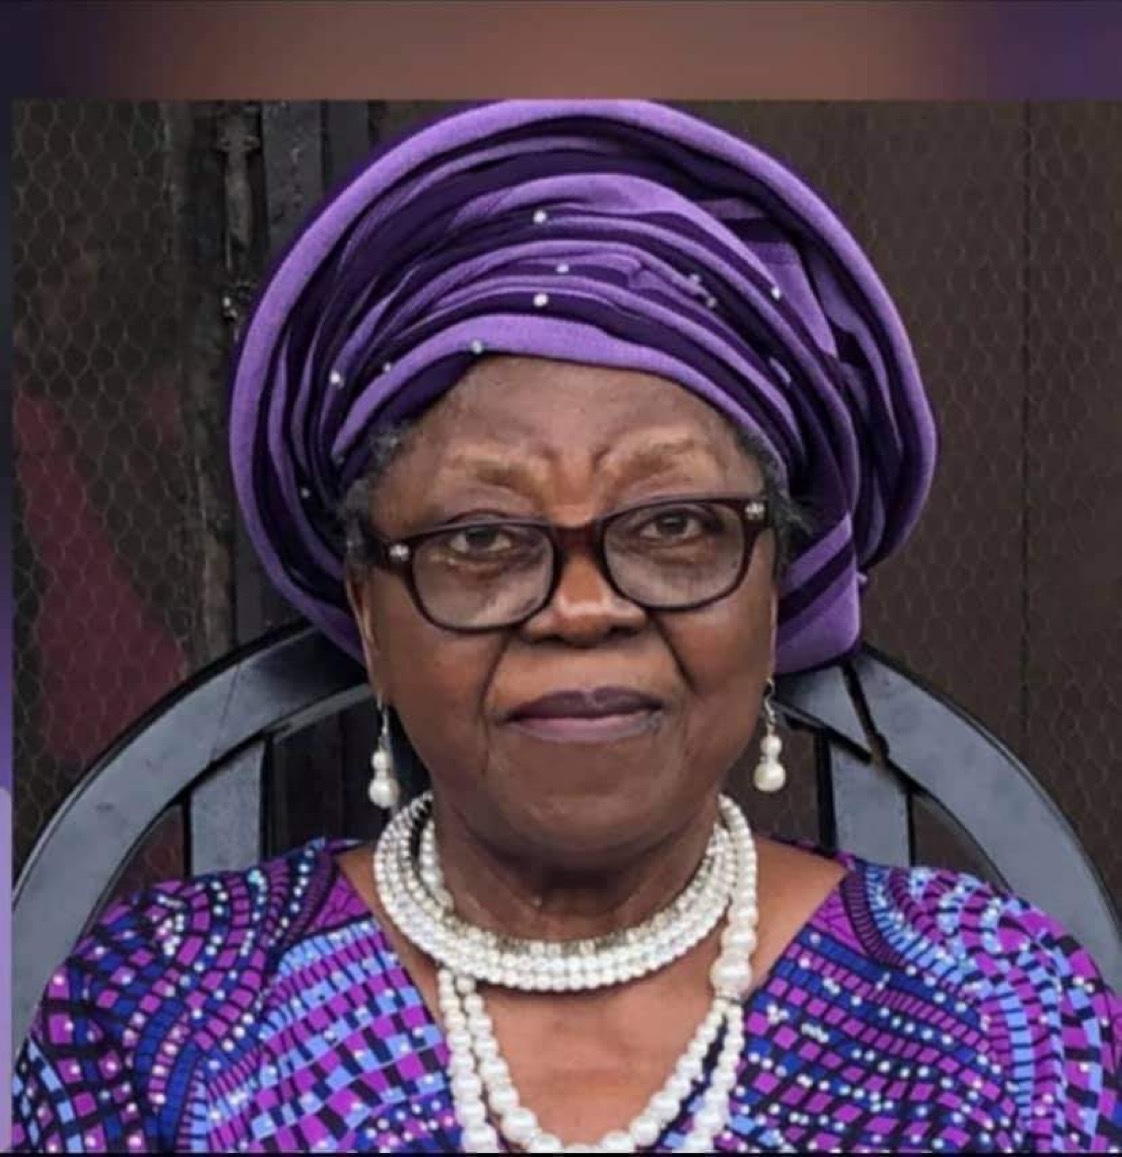 This is Late Prof Felicia Adedoyin, she wrote the Nigerian national pledge in 1976. She died on May 1st, 2021. Her death didn't make headlines and was void of national honor and recognition. May her soul rest in peace Retweet to celebrate her